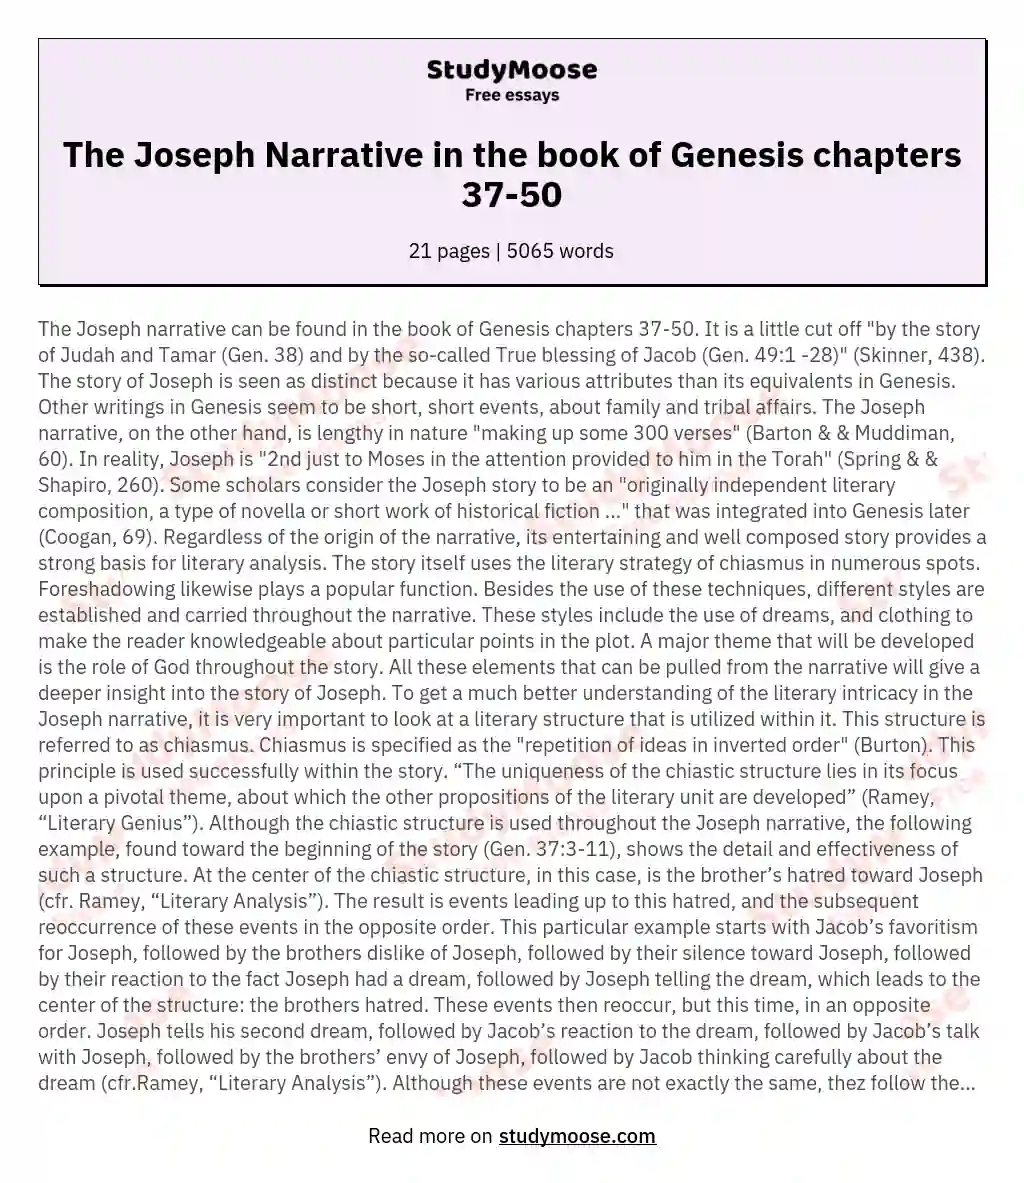 The Joseph Narrative in the book of Genesis chapters 37-50 essay